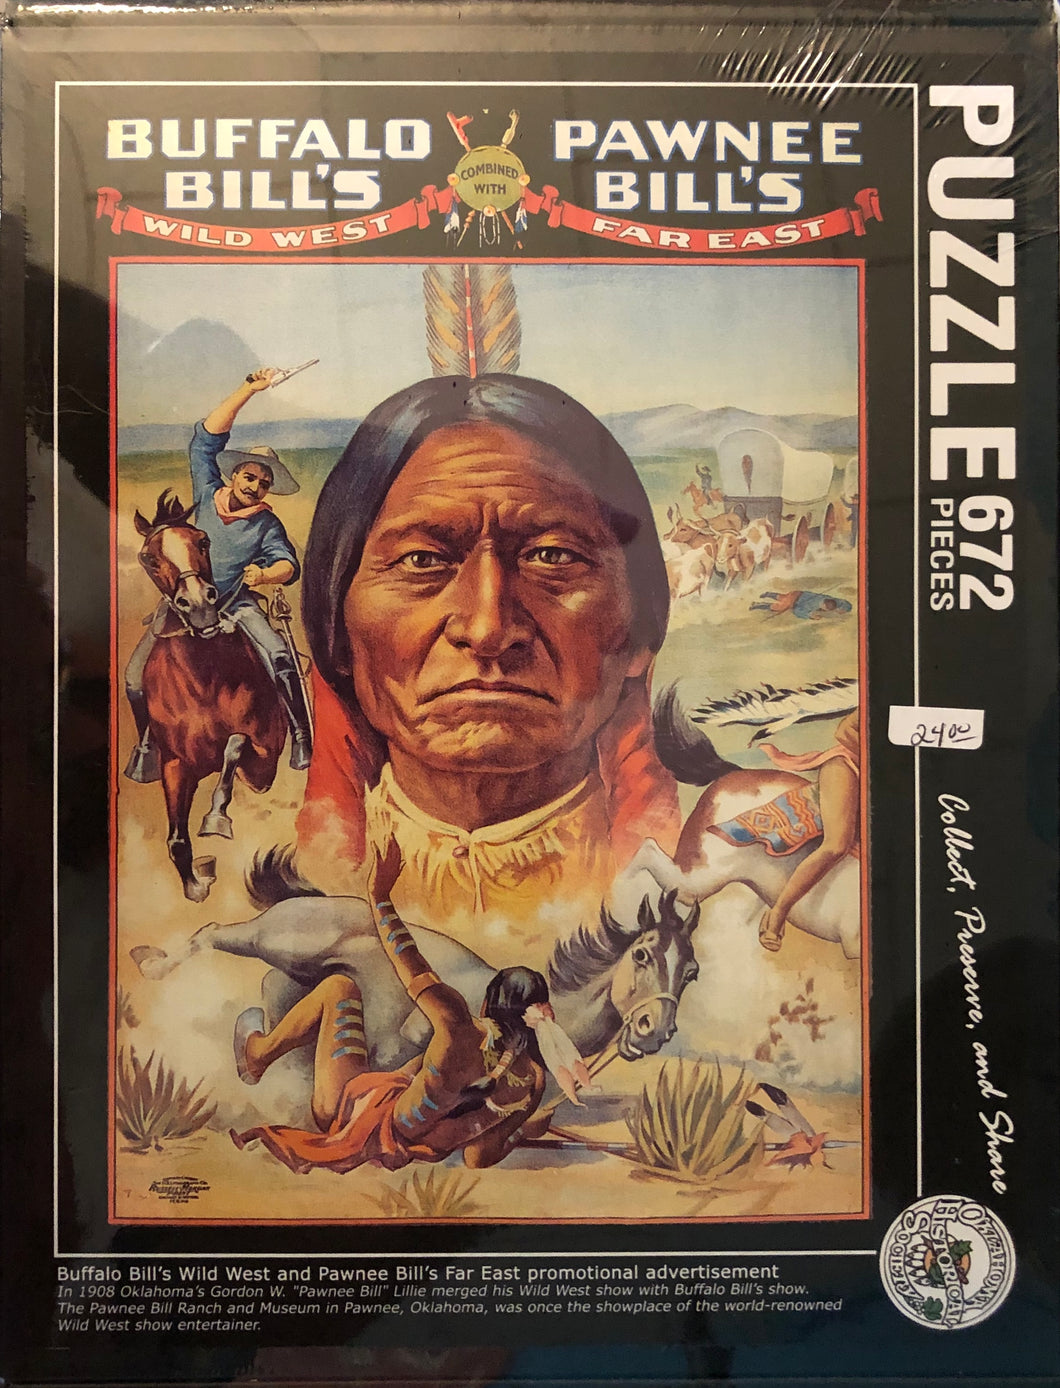 Puzzle of Buffalo Bill's Wild West and Pawnee Bill's Far East promotional advertisement